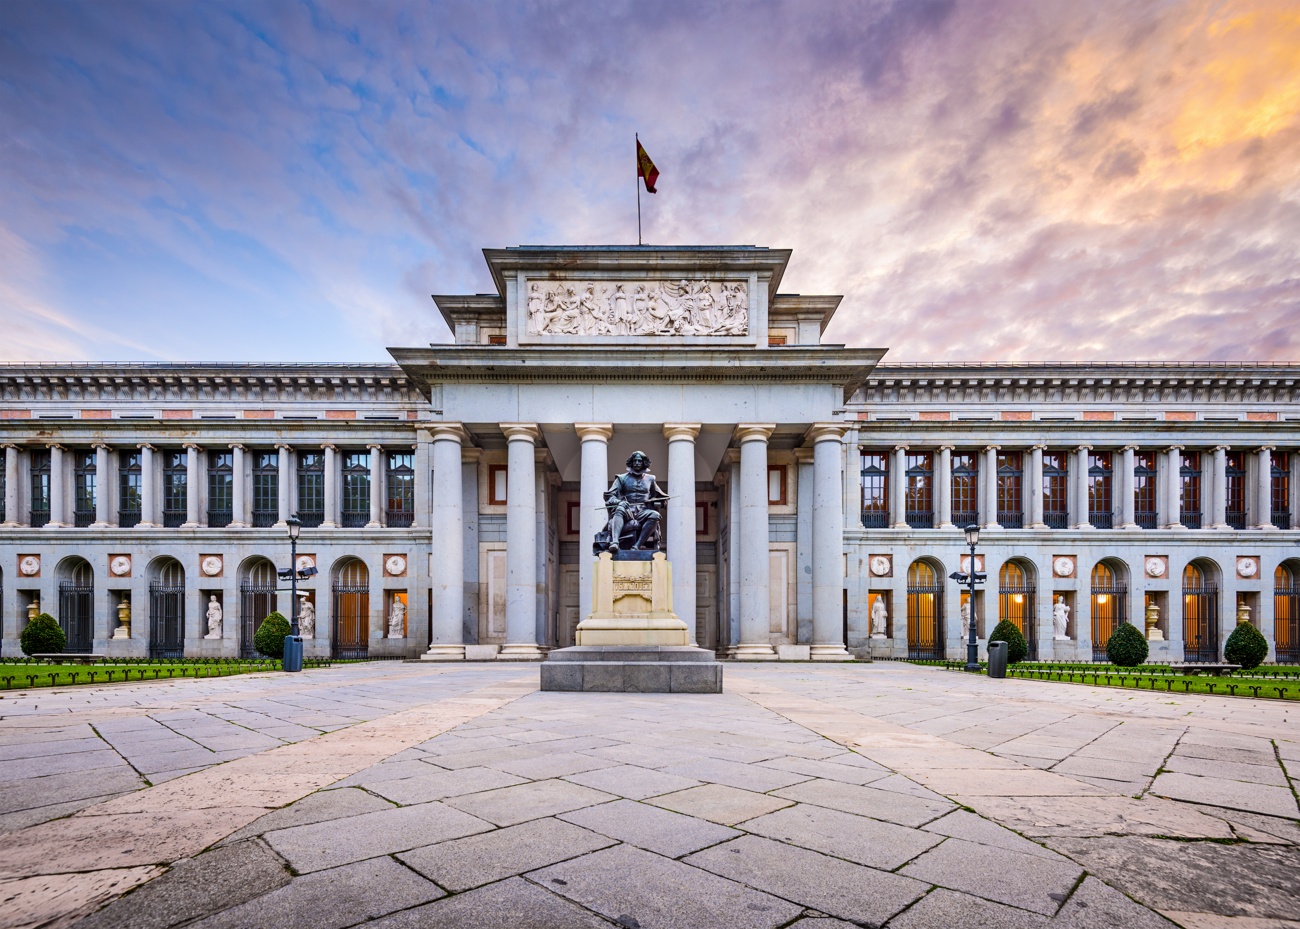 Recognition for the best Art and Culture initiative in the world for the TikTok of the Prado Museum